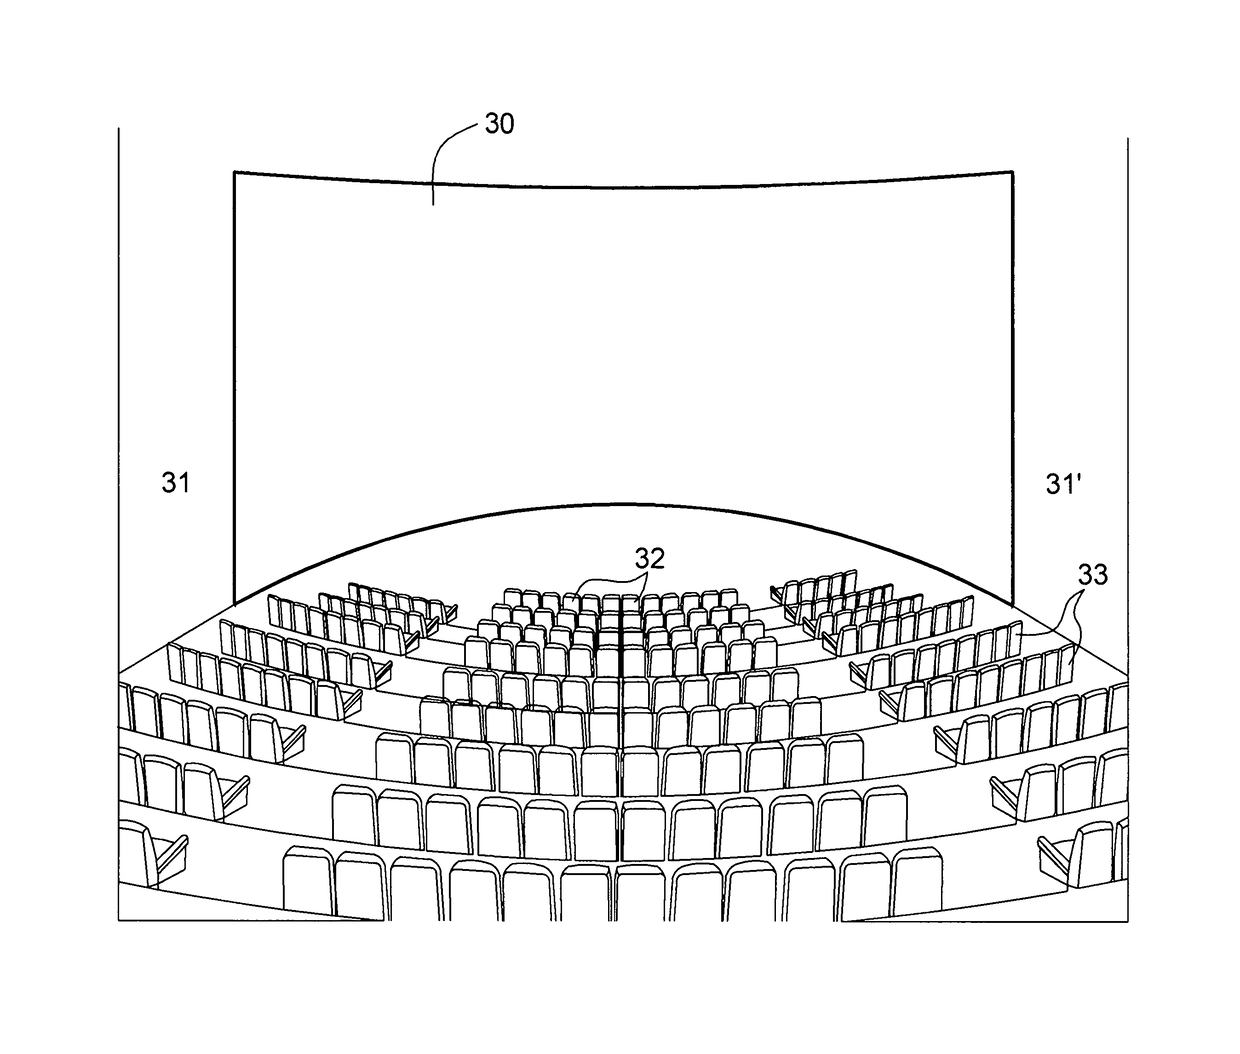 Method and system for creating wide-screen picture-dominance effect in a conventional motion-picture theater